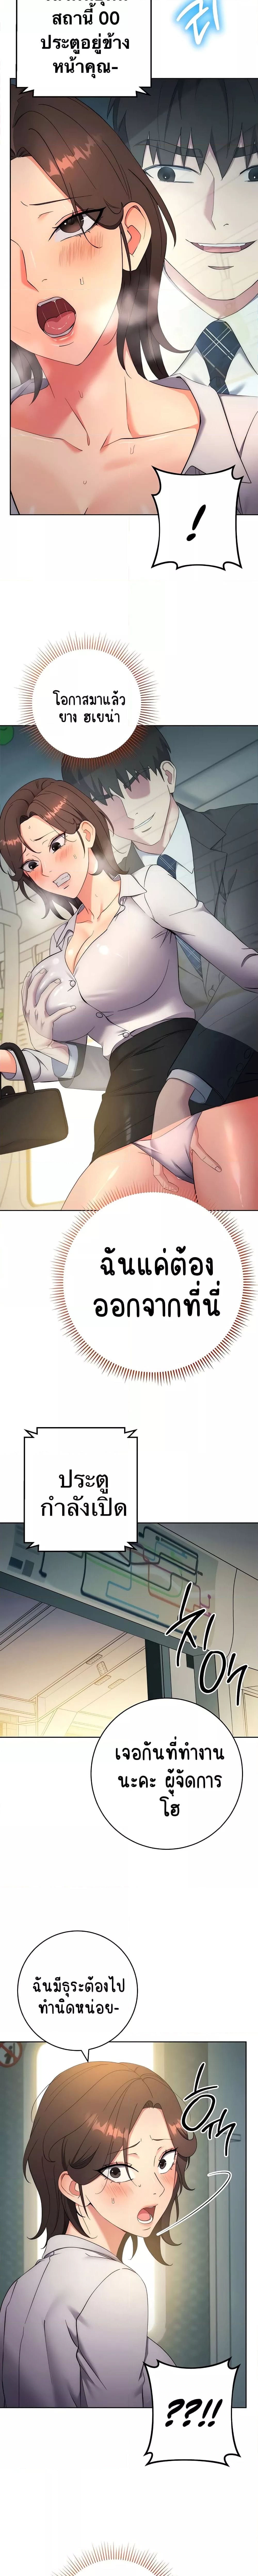 Outsider: The Invisible Man ตอนที่ 9 ภาพ 19